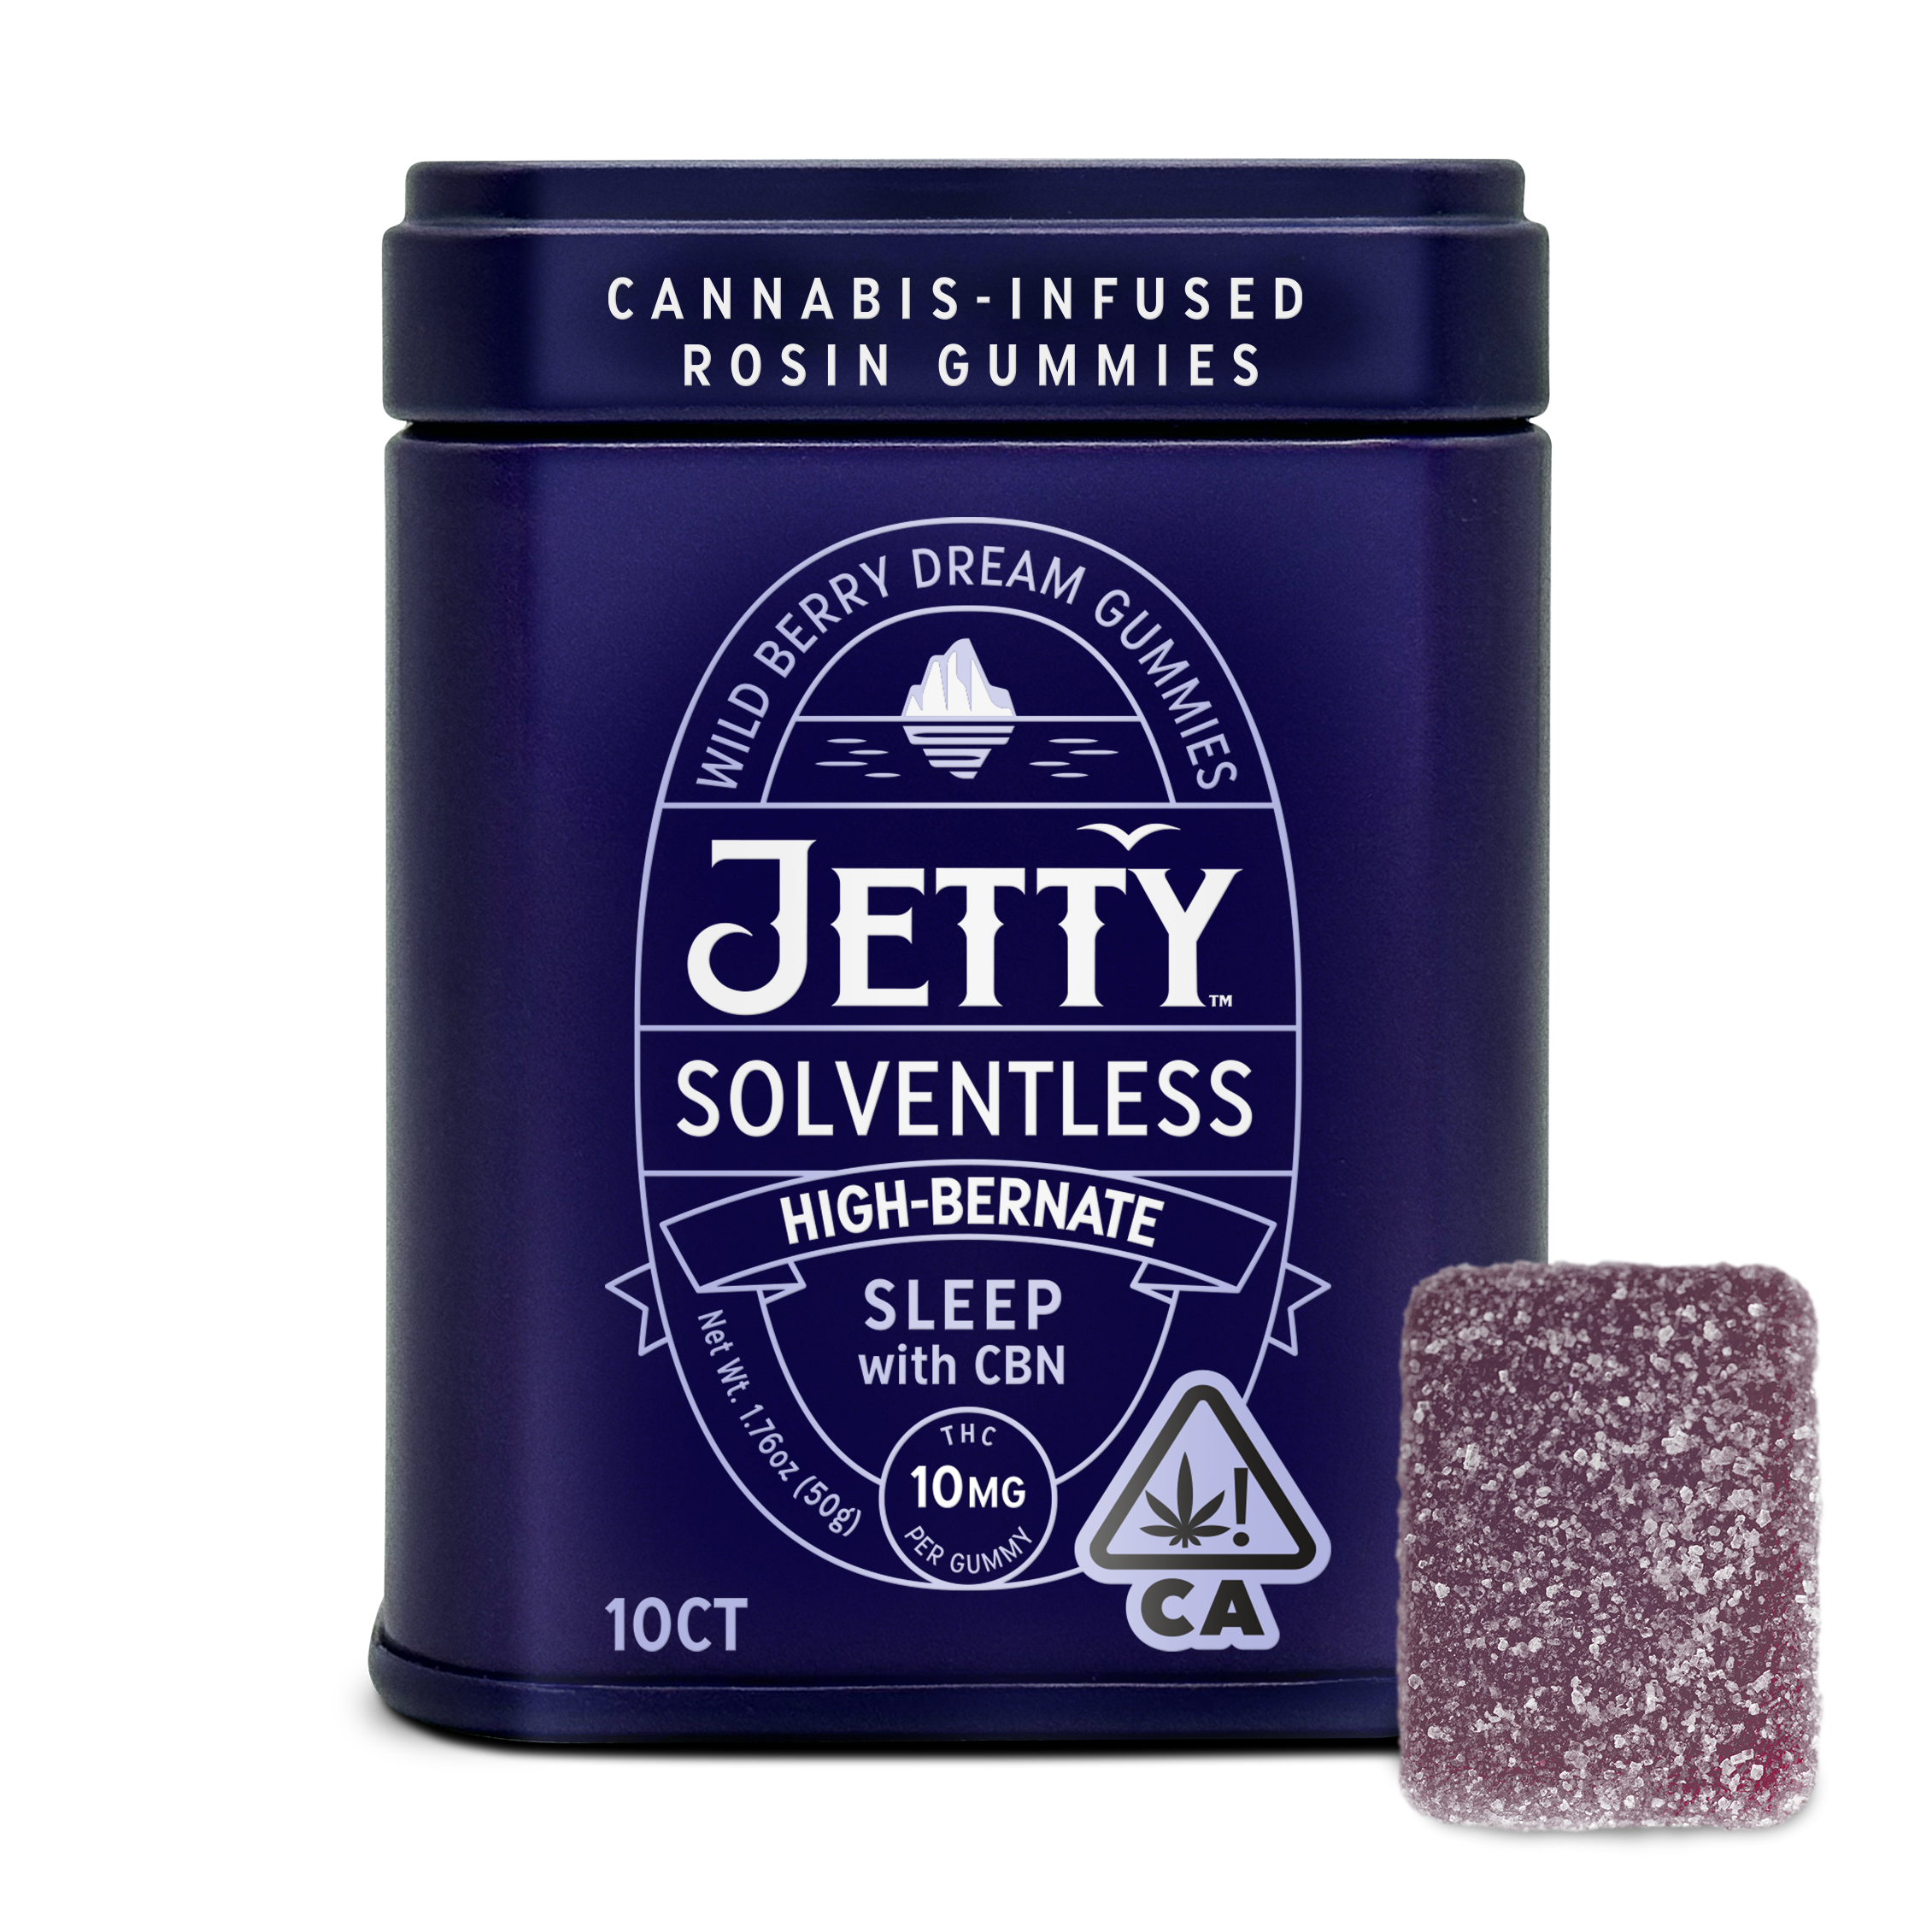 A photograph of Jetty Solventless Rosin Gummies 5:1 - 20mg CBN Wild Berry Dream, 10ct, 100mg THC